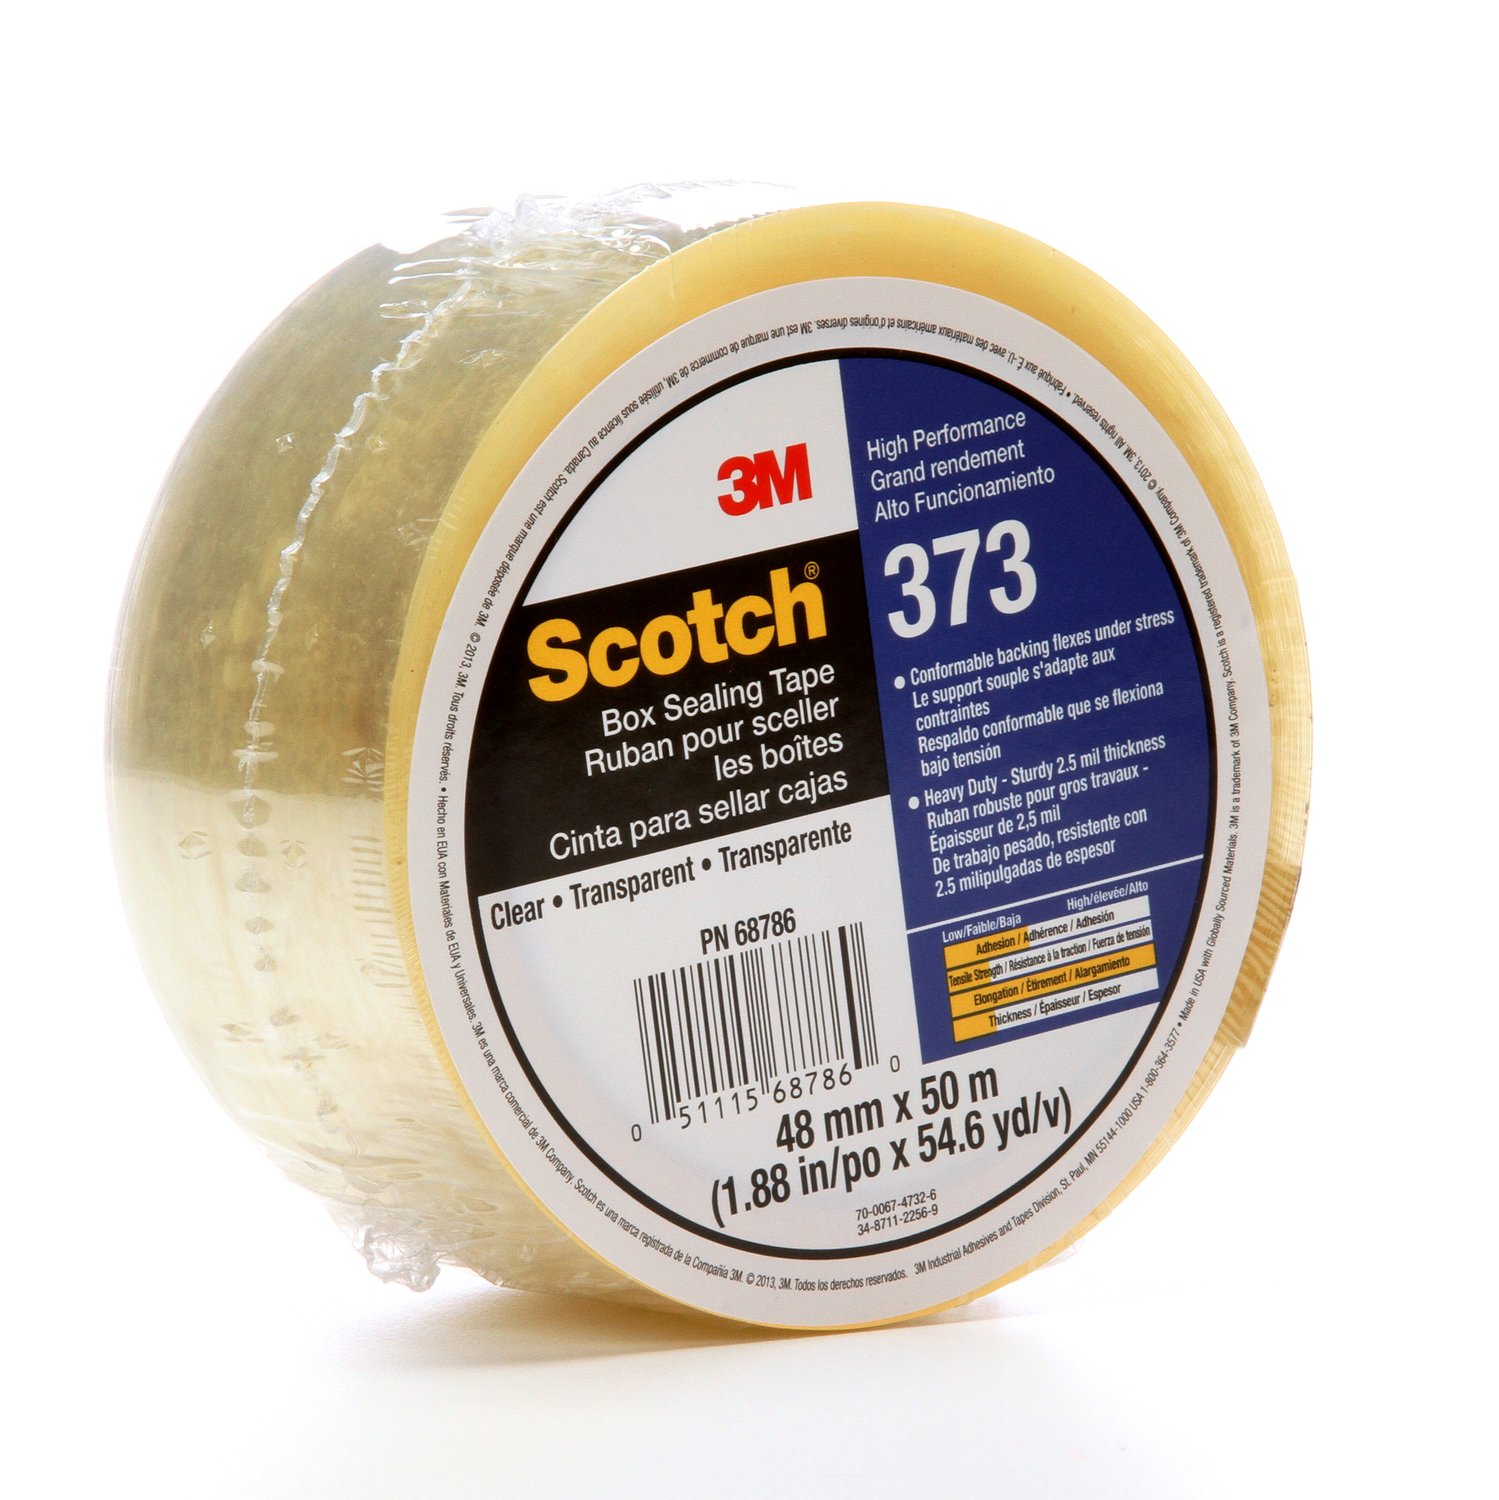 7010291514 - Scotch Box Sealing Tape 373, Clear, 48 mm x 50 m, 36/Case, Individually
Wrapped Conveniently Packaged